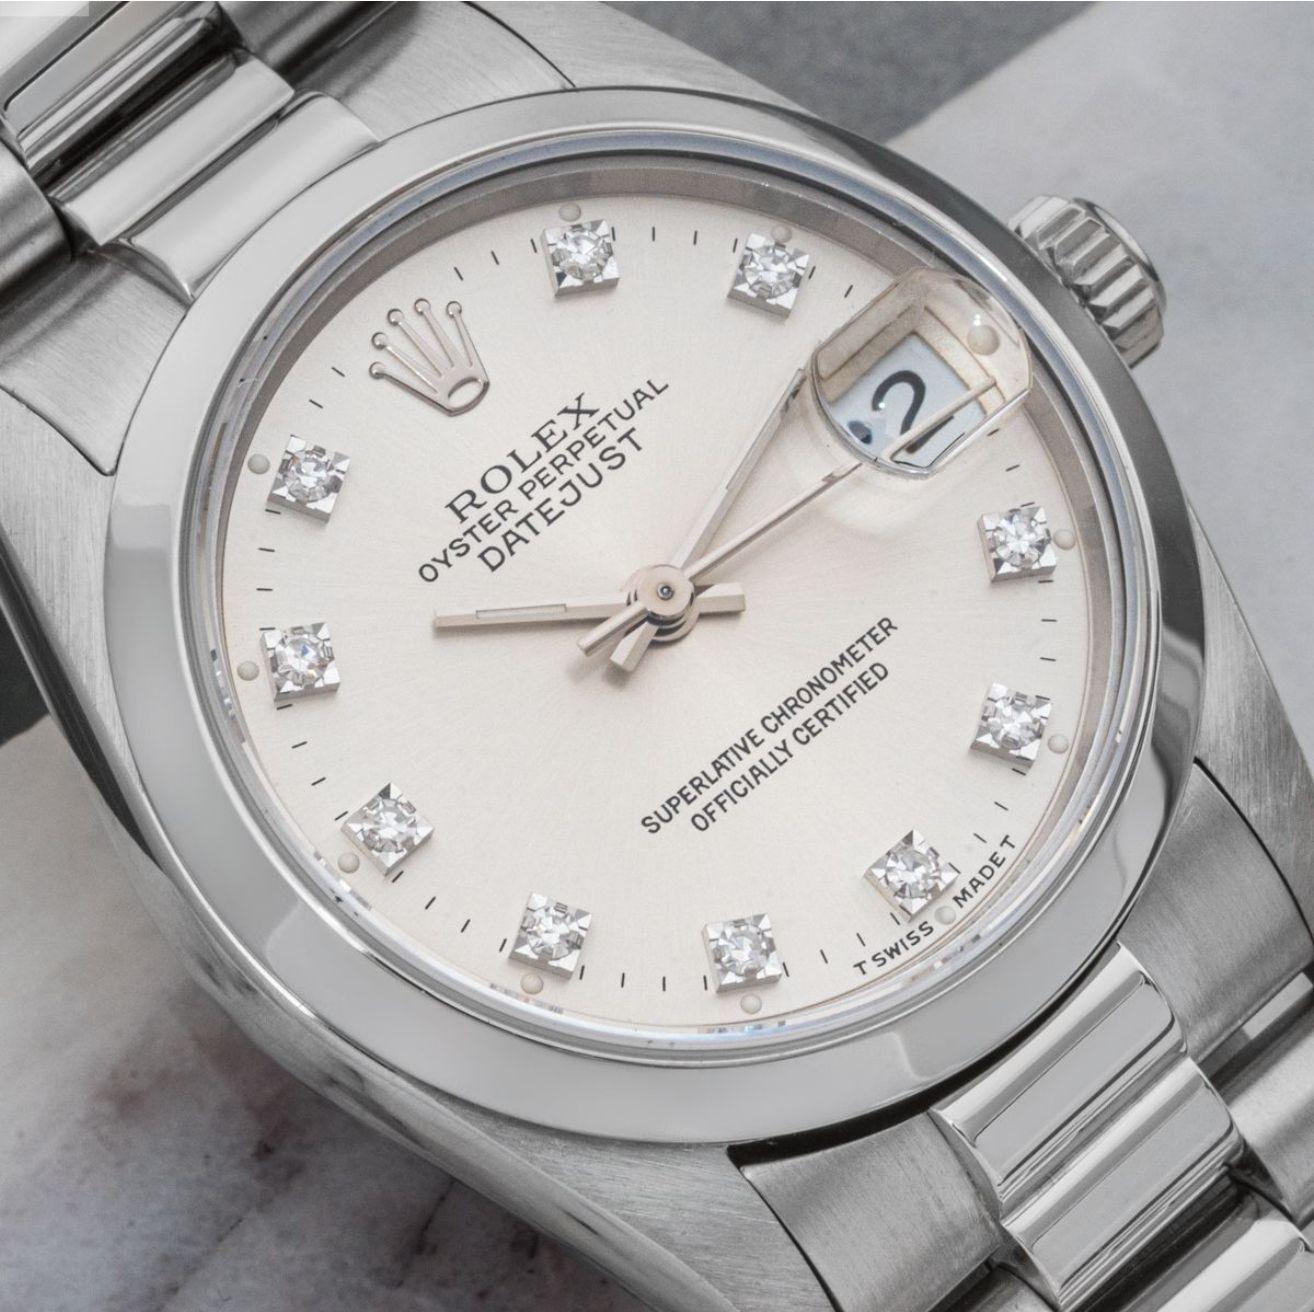 A midsize platinum Datejust by Rolex. Featuring a silver dial with diamond set hour markers and a smooth platinum bezel. The president bracelet is fastened by a concealed folding Crownclasp. The watch is also fitted with a sapphire crystal and a